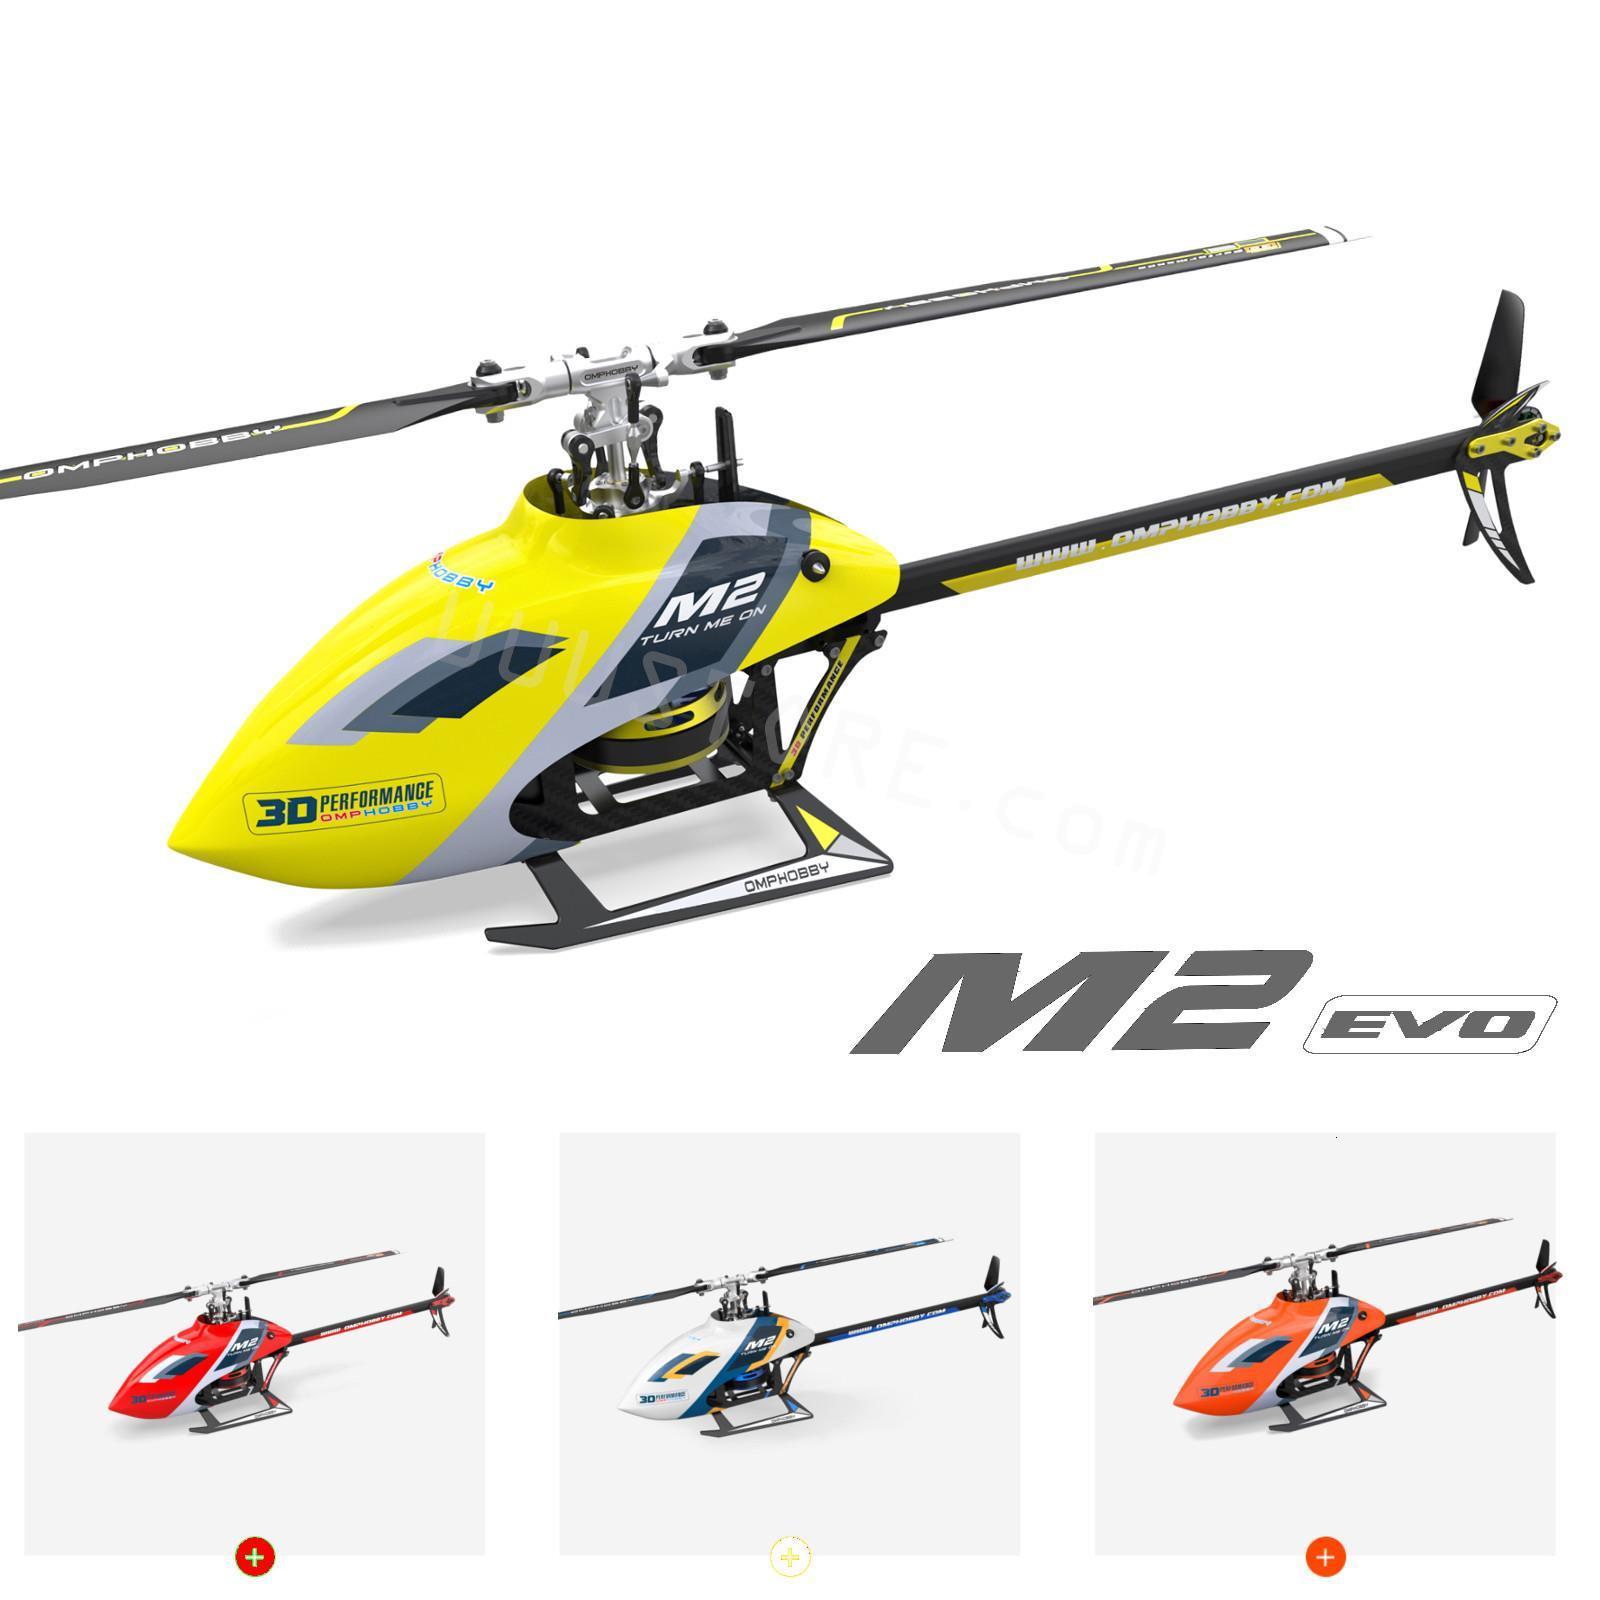 

Electric RC Aircraft OMPHOBBY M2 EVO 6CH 3D Flybarless Dual Brushless Motor Direct Drive RC Helicopter BNF with Flight Controller Model Toys 230615, Bnf white